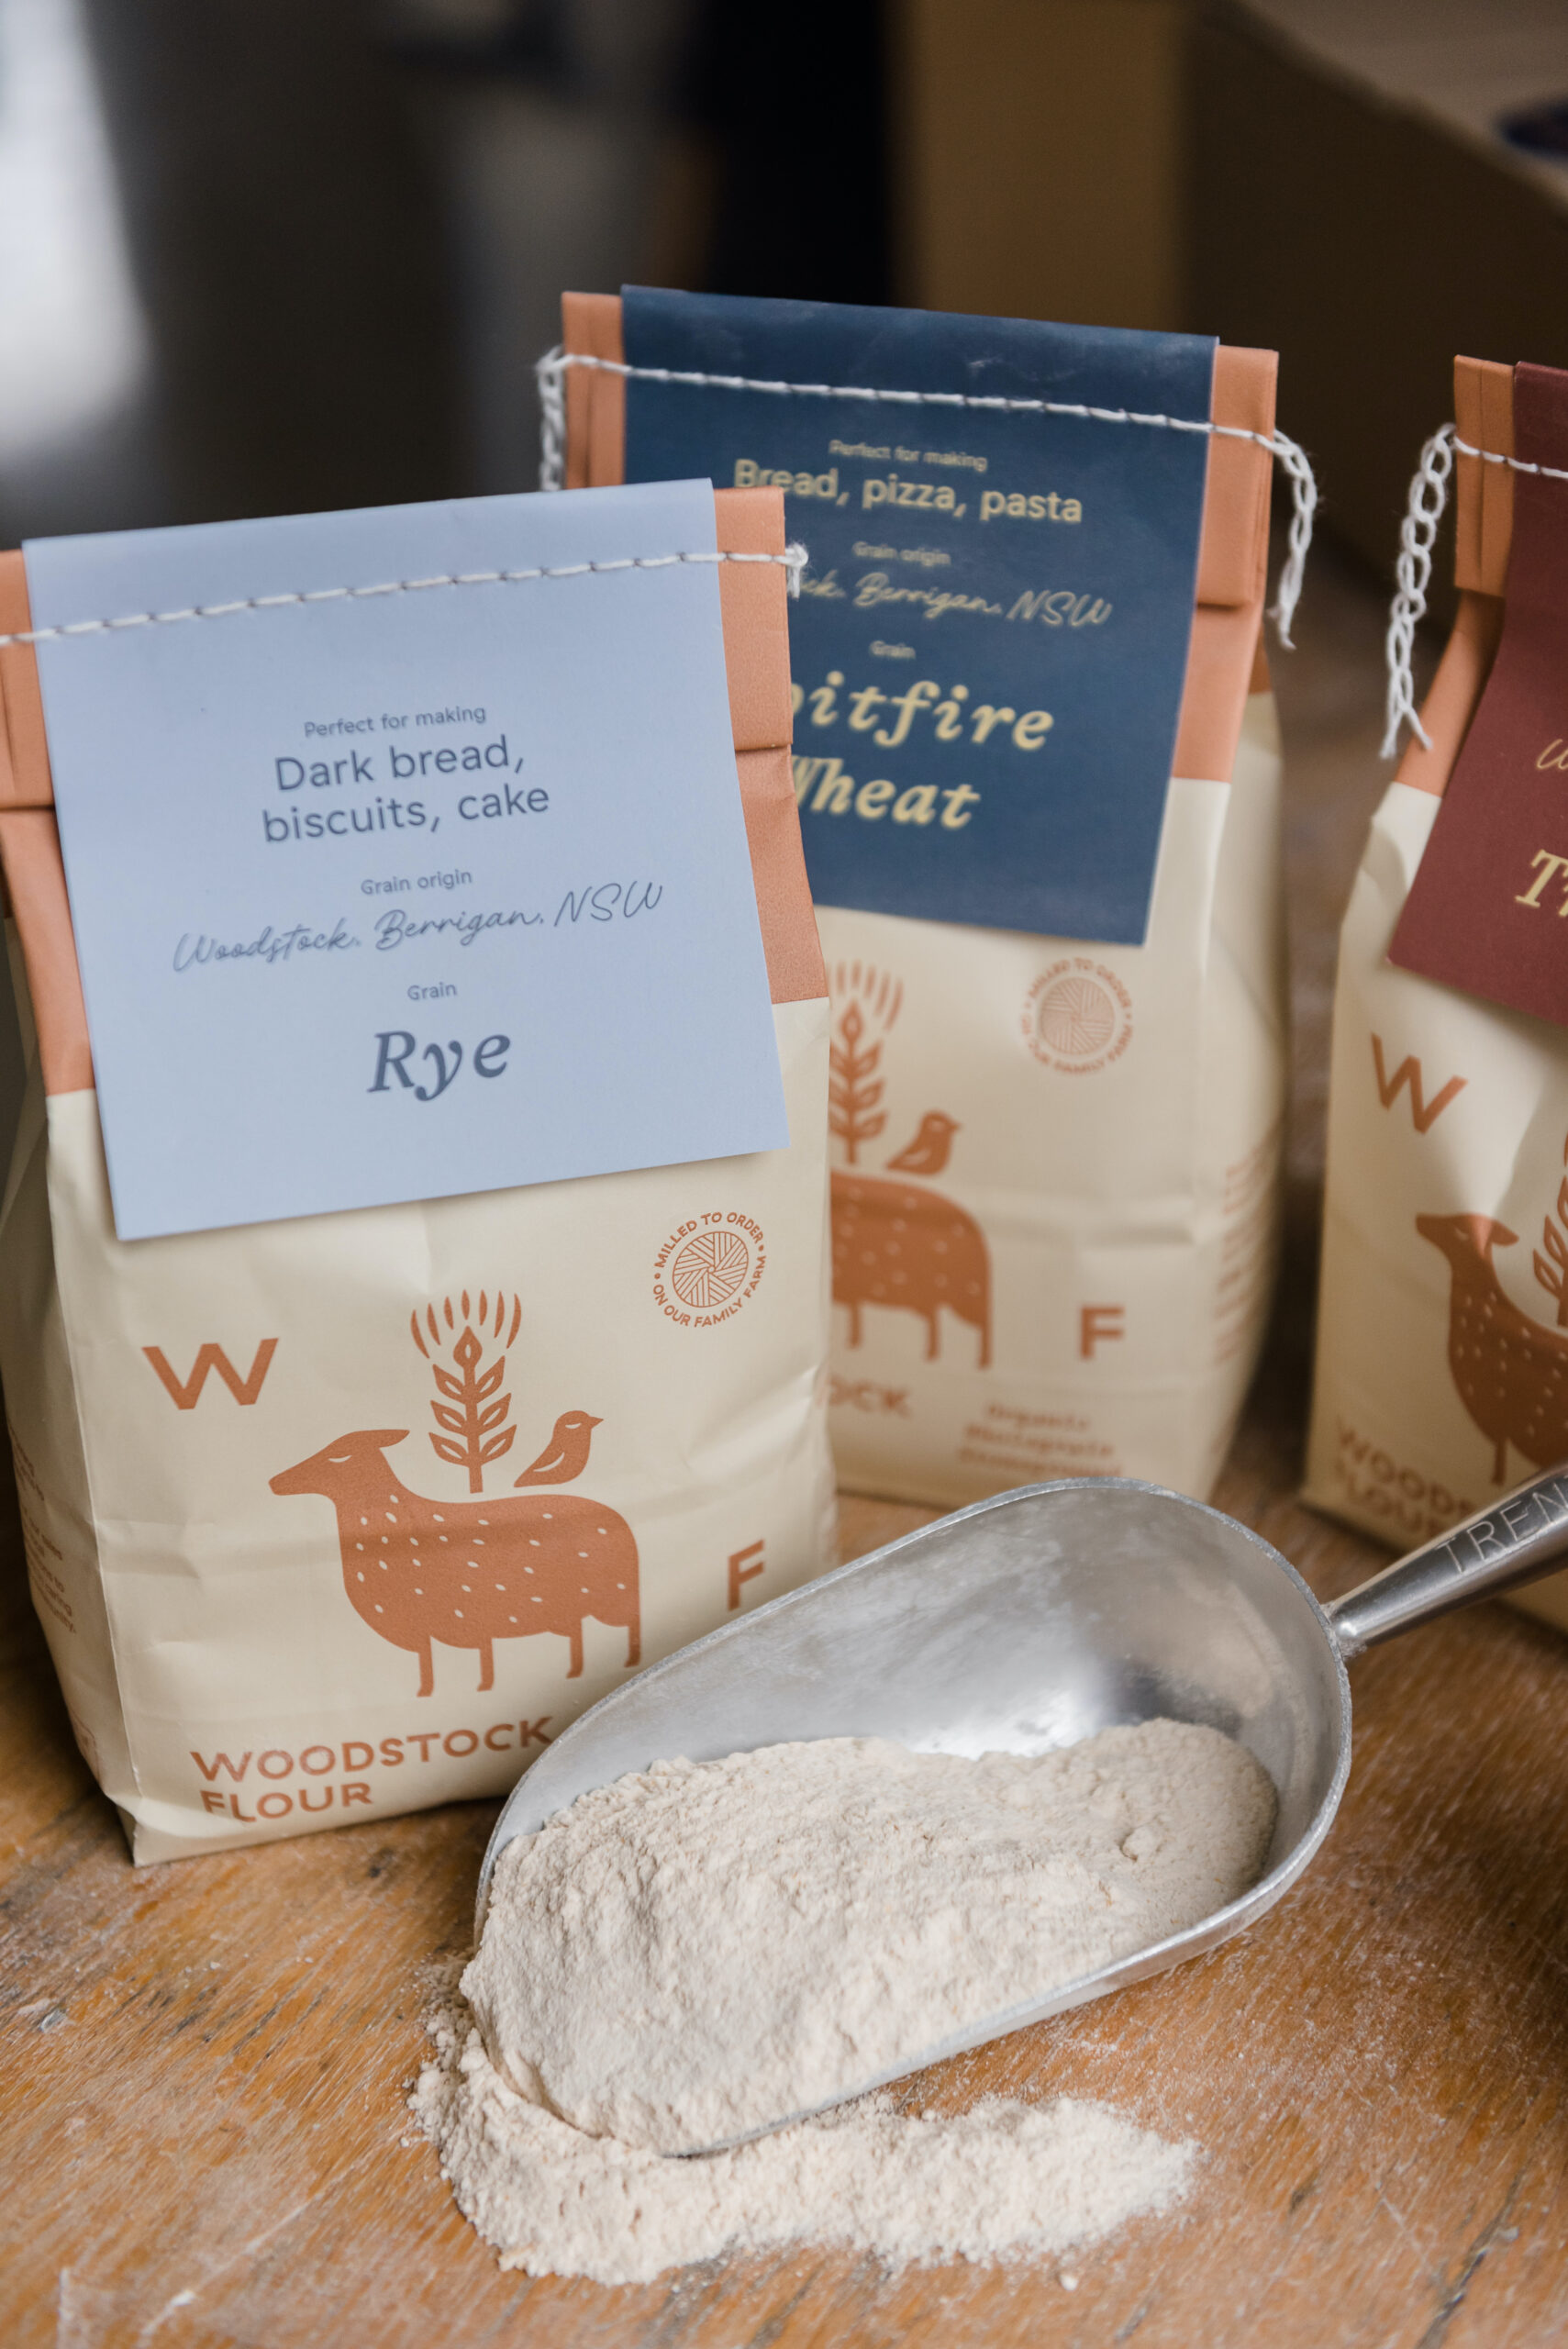 Woodstock Flour Products